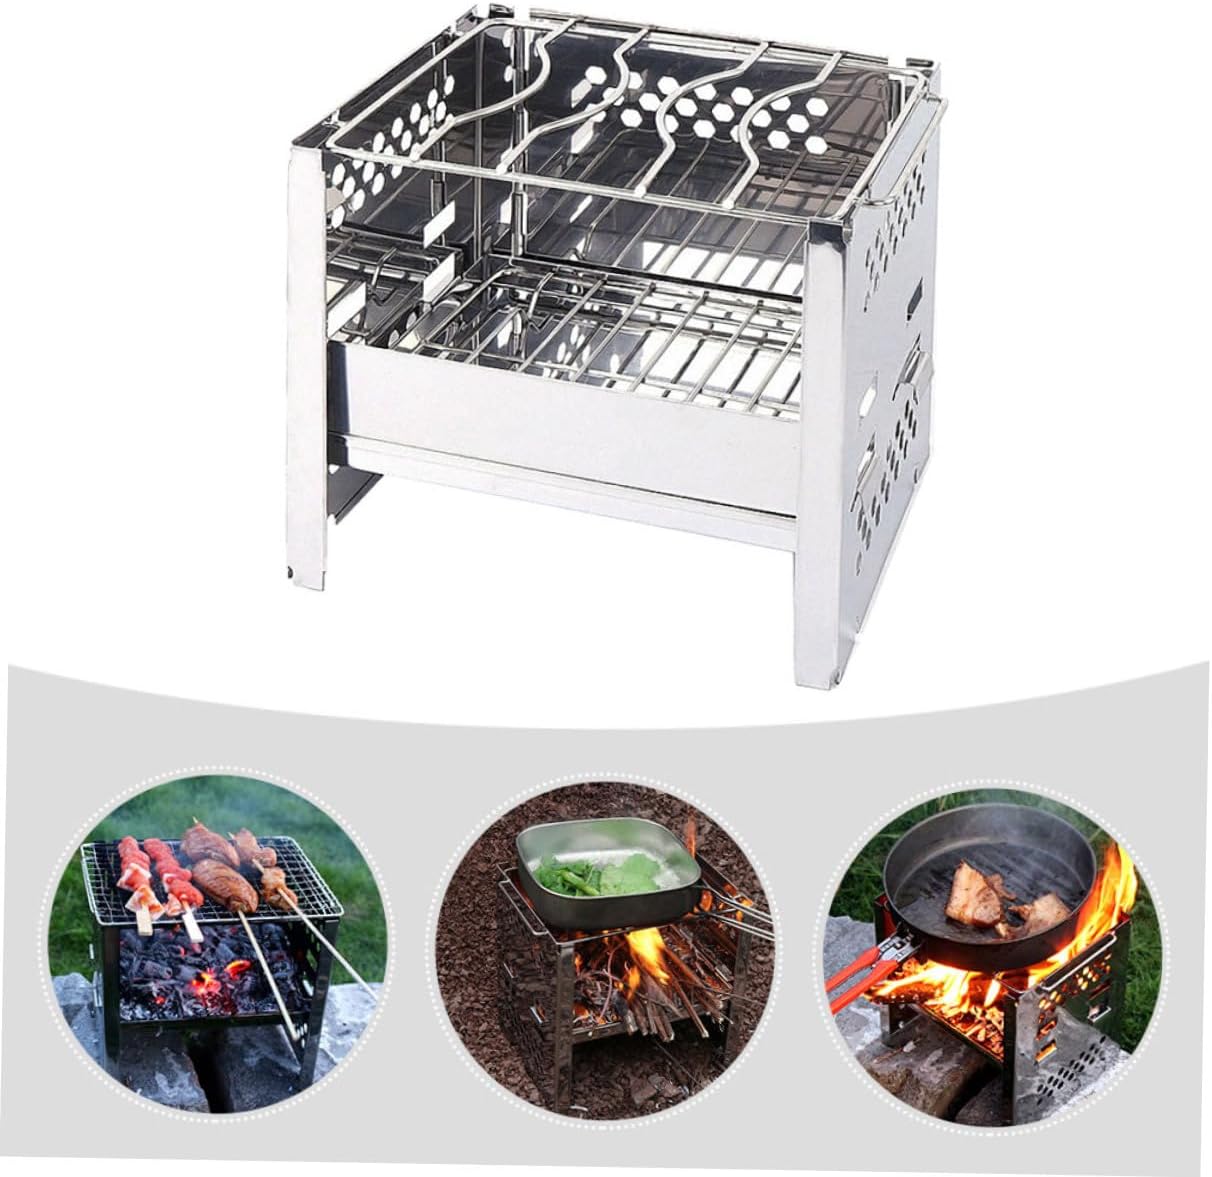 INOOMP 1 Set Heating Stove Grill Outdoor Bbq Tool Electric Indoor Grill Bbq Stove Mini Charcoal Grill Bbq Grill Portable Electric Flat Top Griddle Gas Grill Stainless Steel Fold Barbecue - INOOMP 1 Set Heating Stove Grill Review